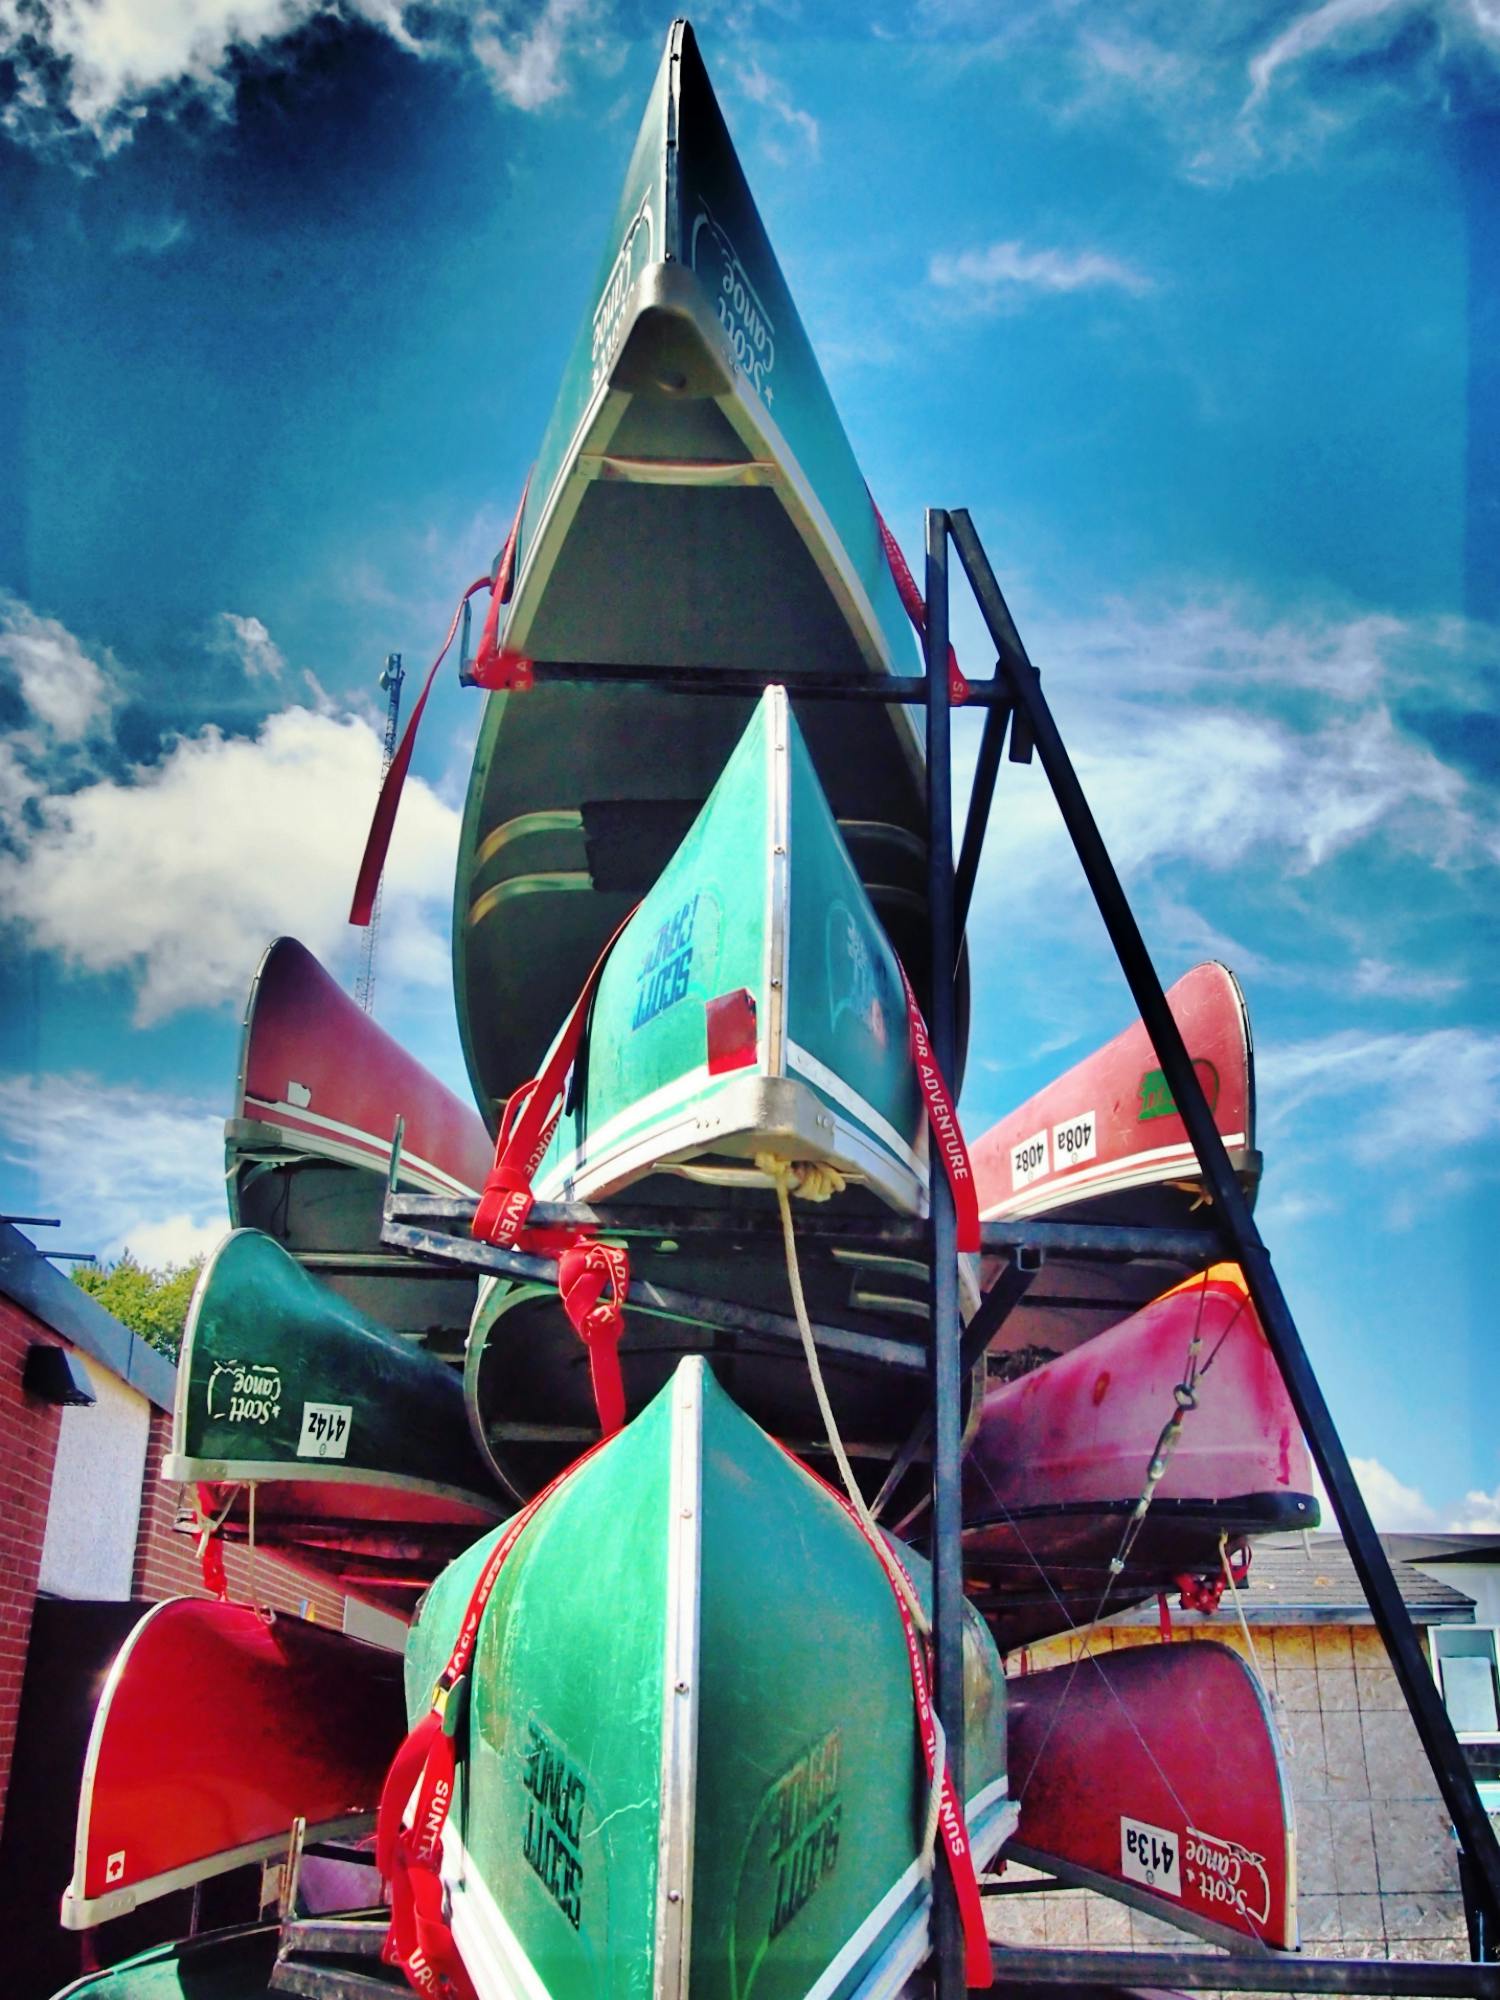 Free stock photo of canoes, colorful